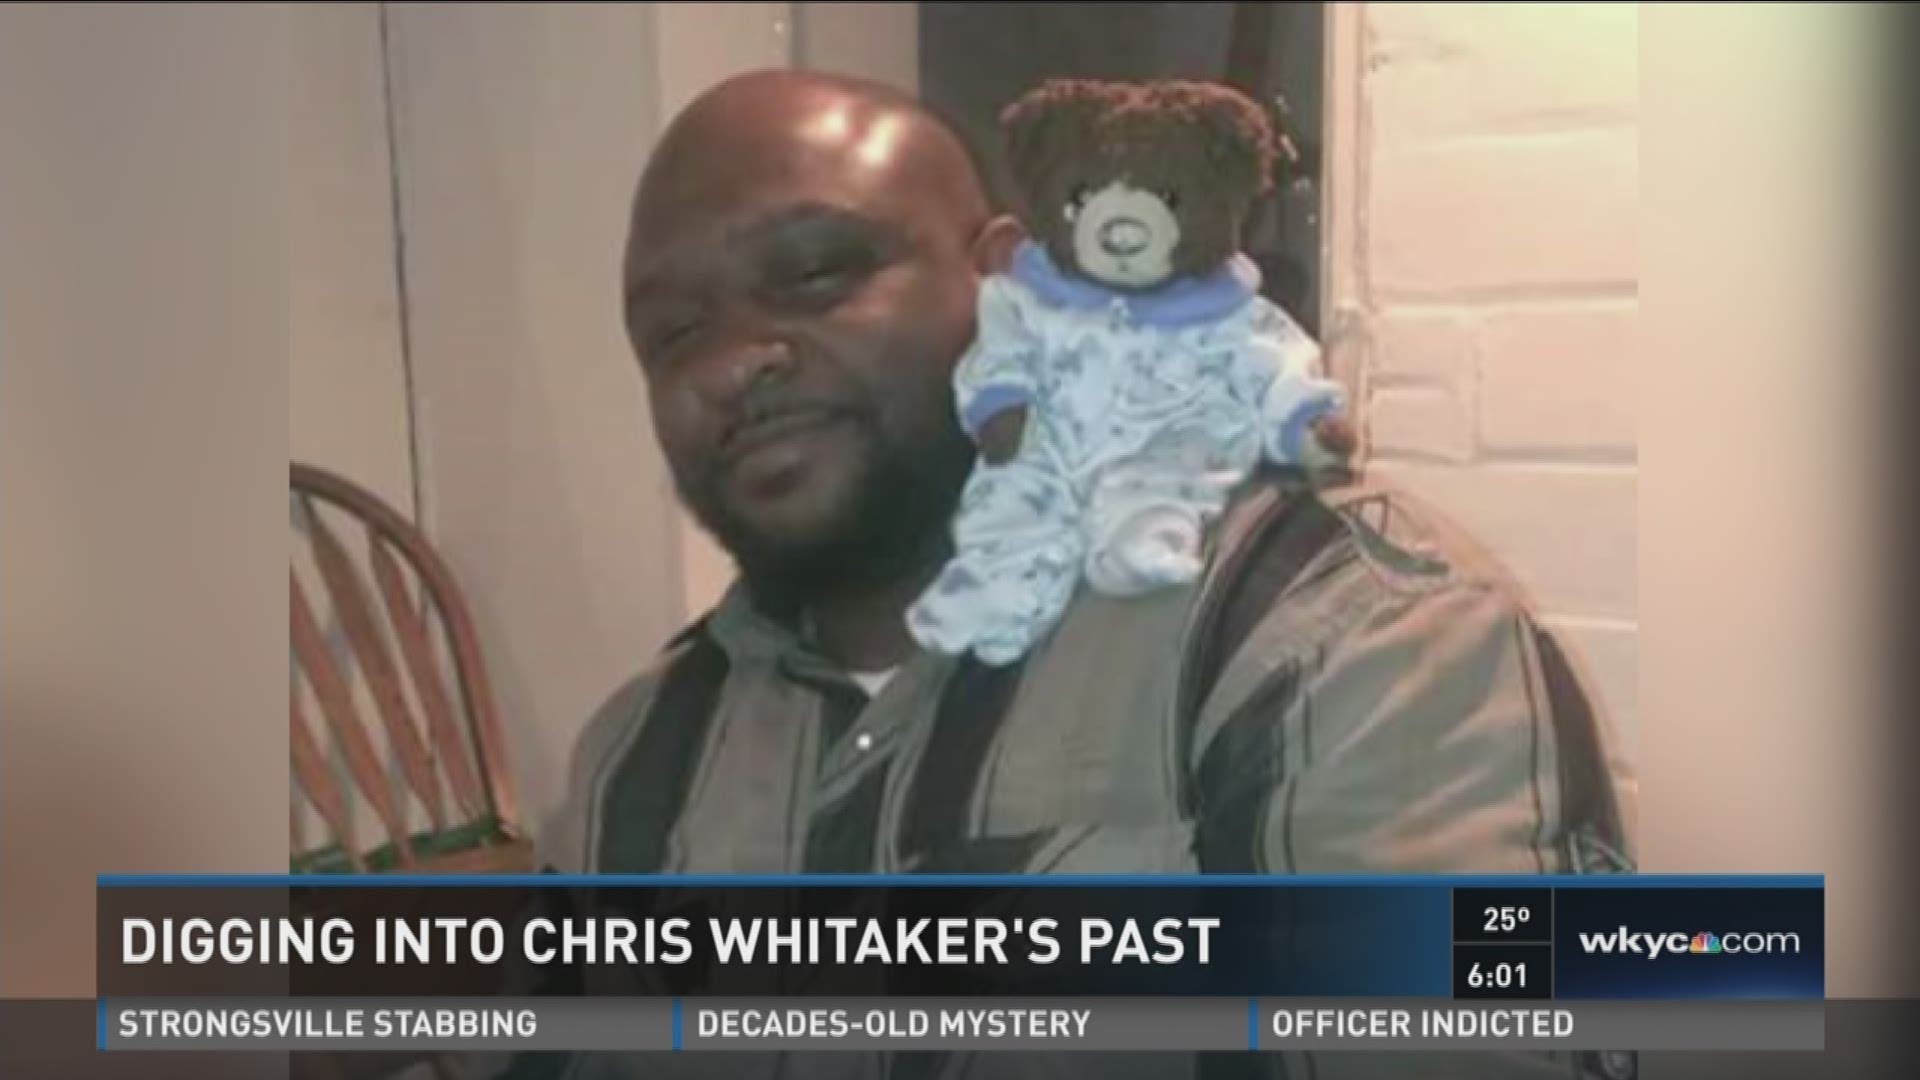 Digging into Chris Whitaker's past